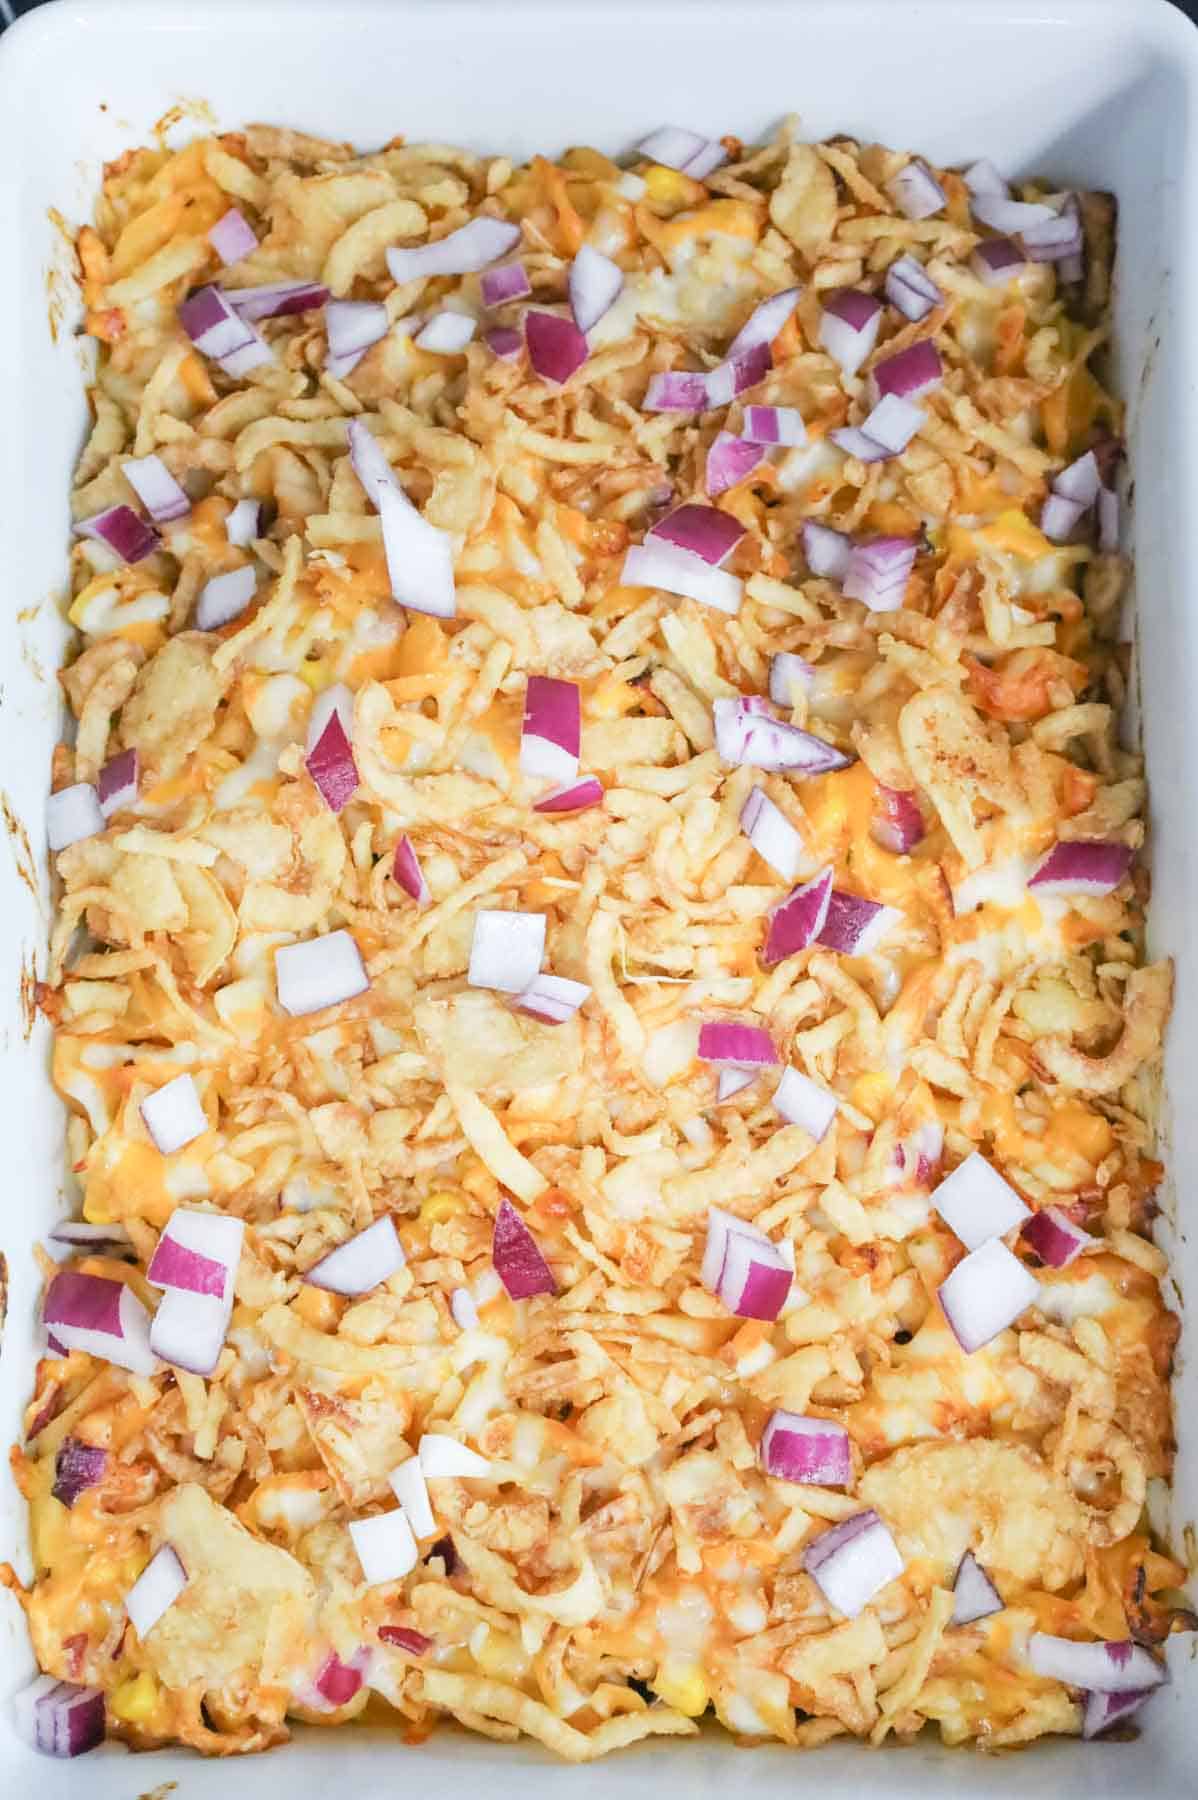 diced red onions and French's crispy fried onions on top